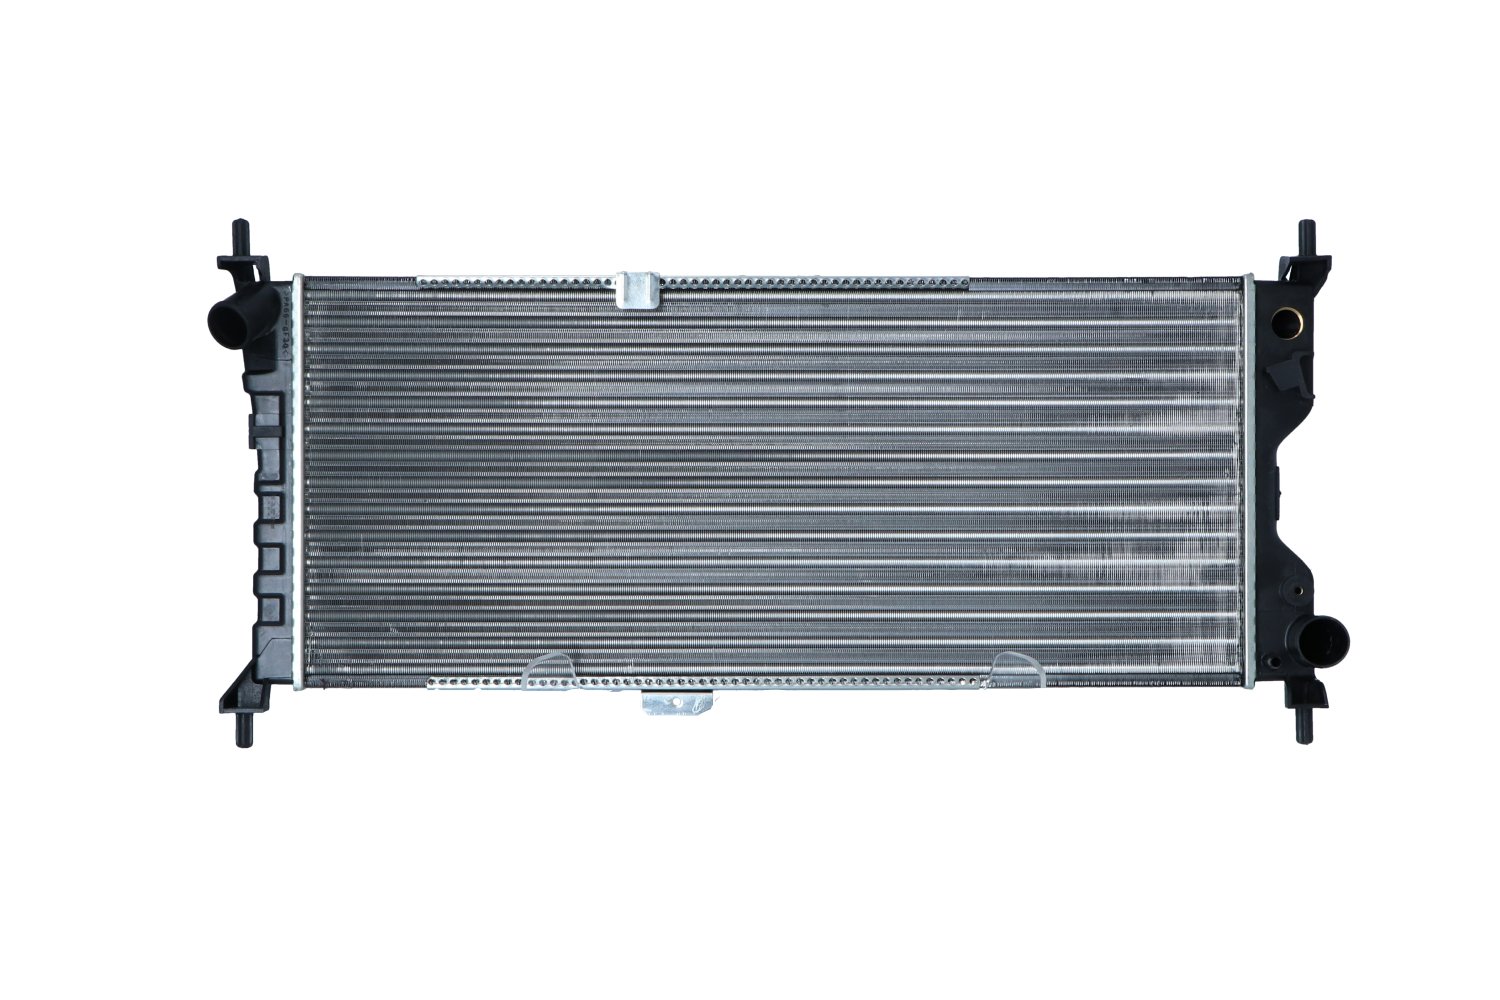 NRF 507522A Engine radiator Aluminium, 650 x 285 x 34 mm, Economy Class, Mechanically jointed cooling fins